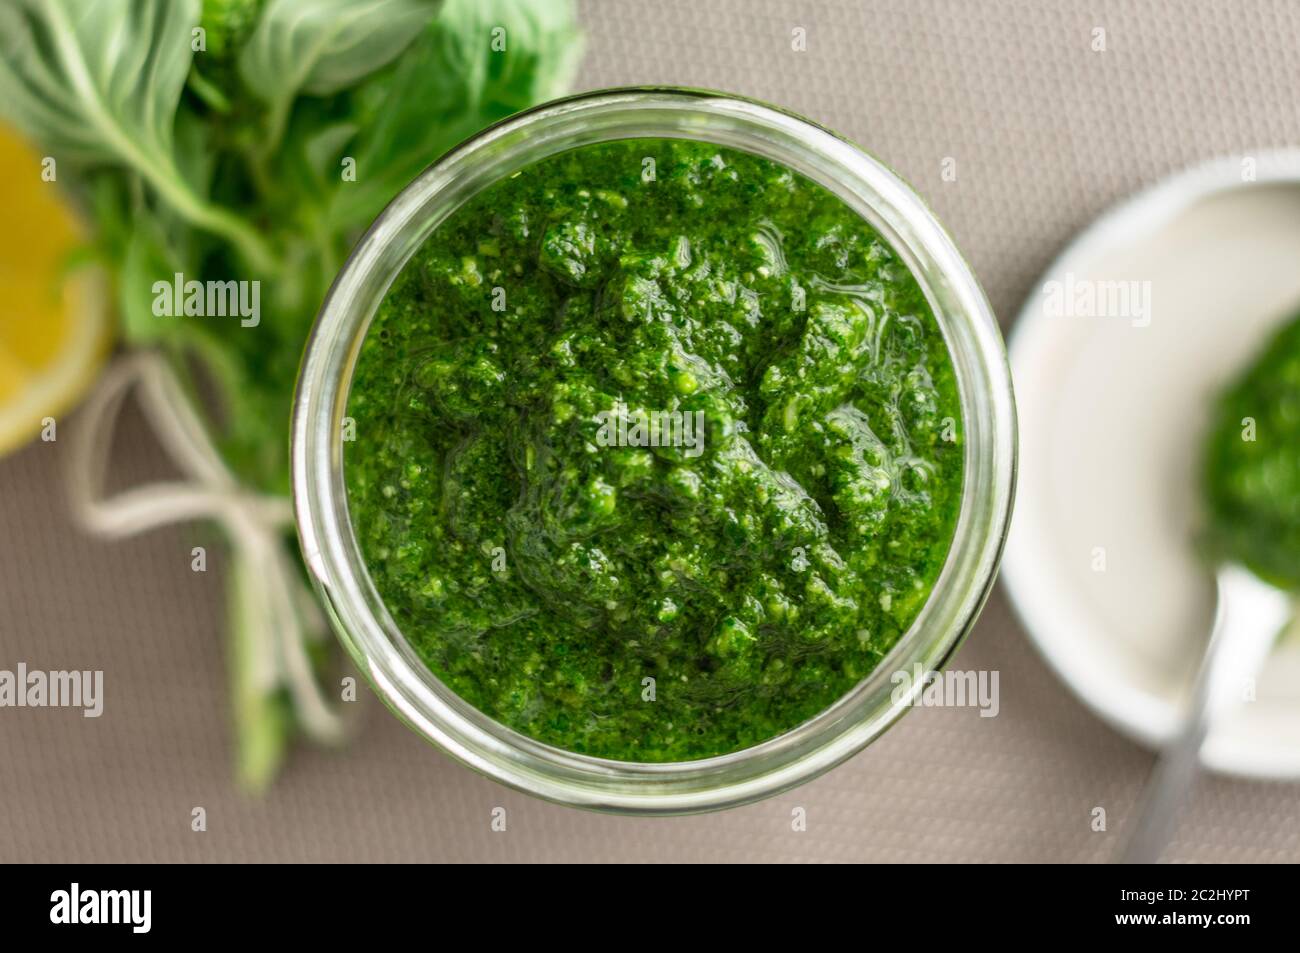 Fresh homemade basil pesto sauce in a glass jar viewed from above. Originally from italy, pesto is commonly made with basil and used as a sauce for pa Stock Photo